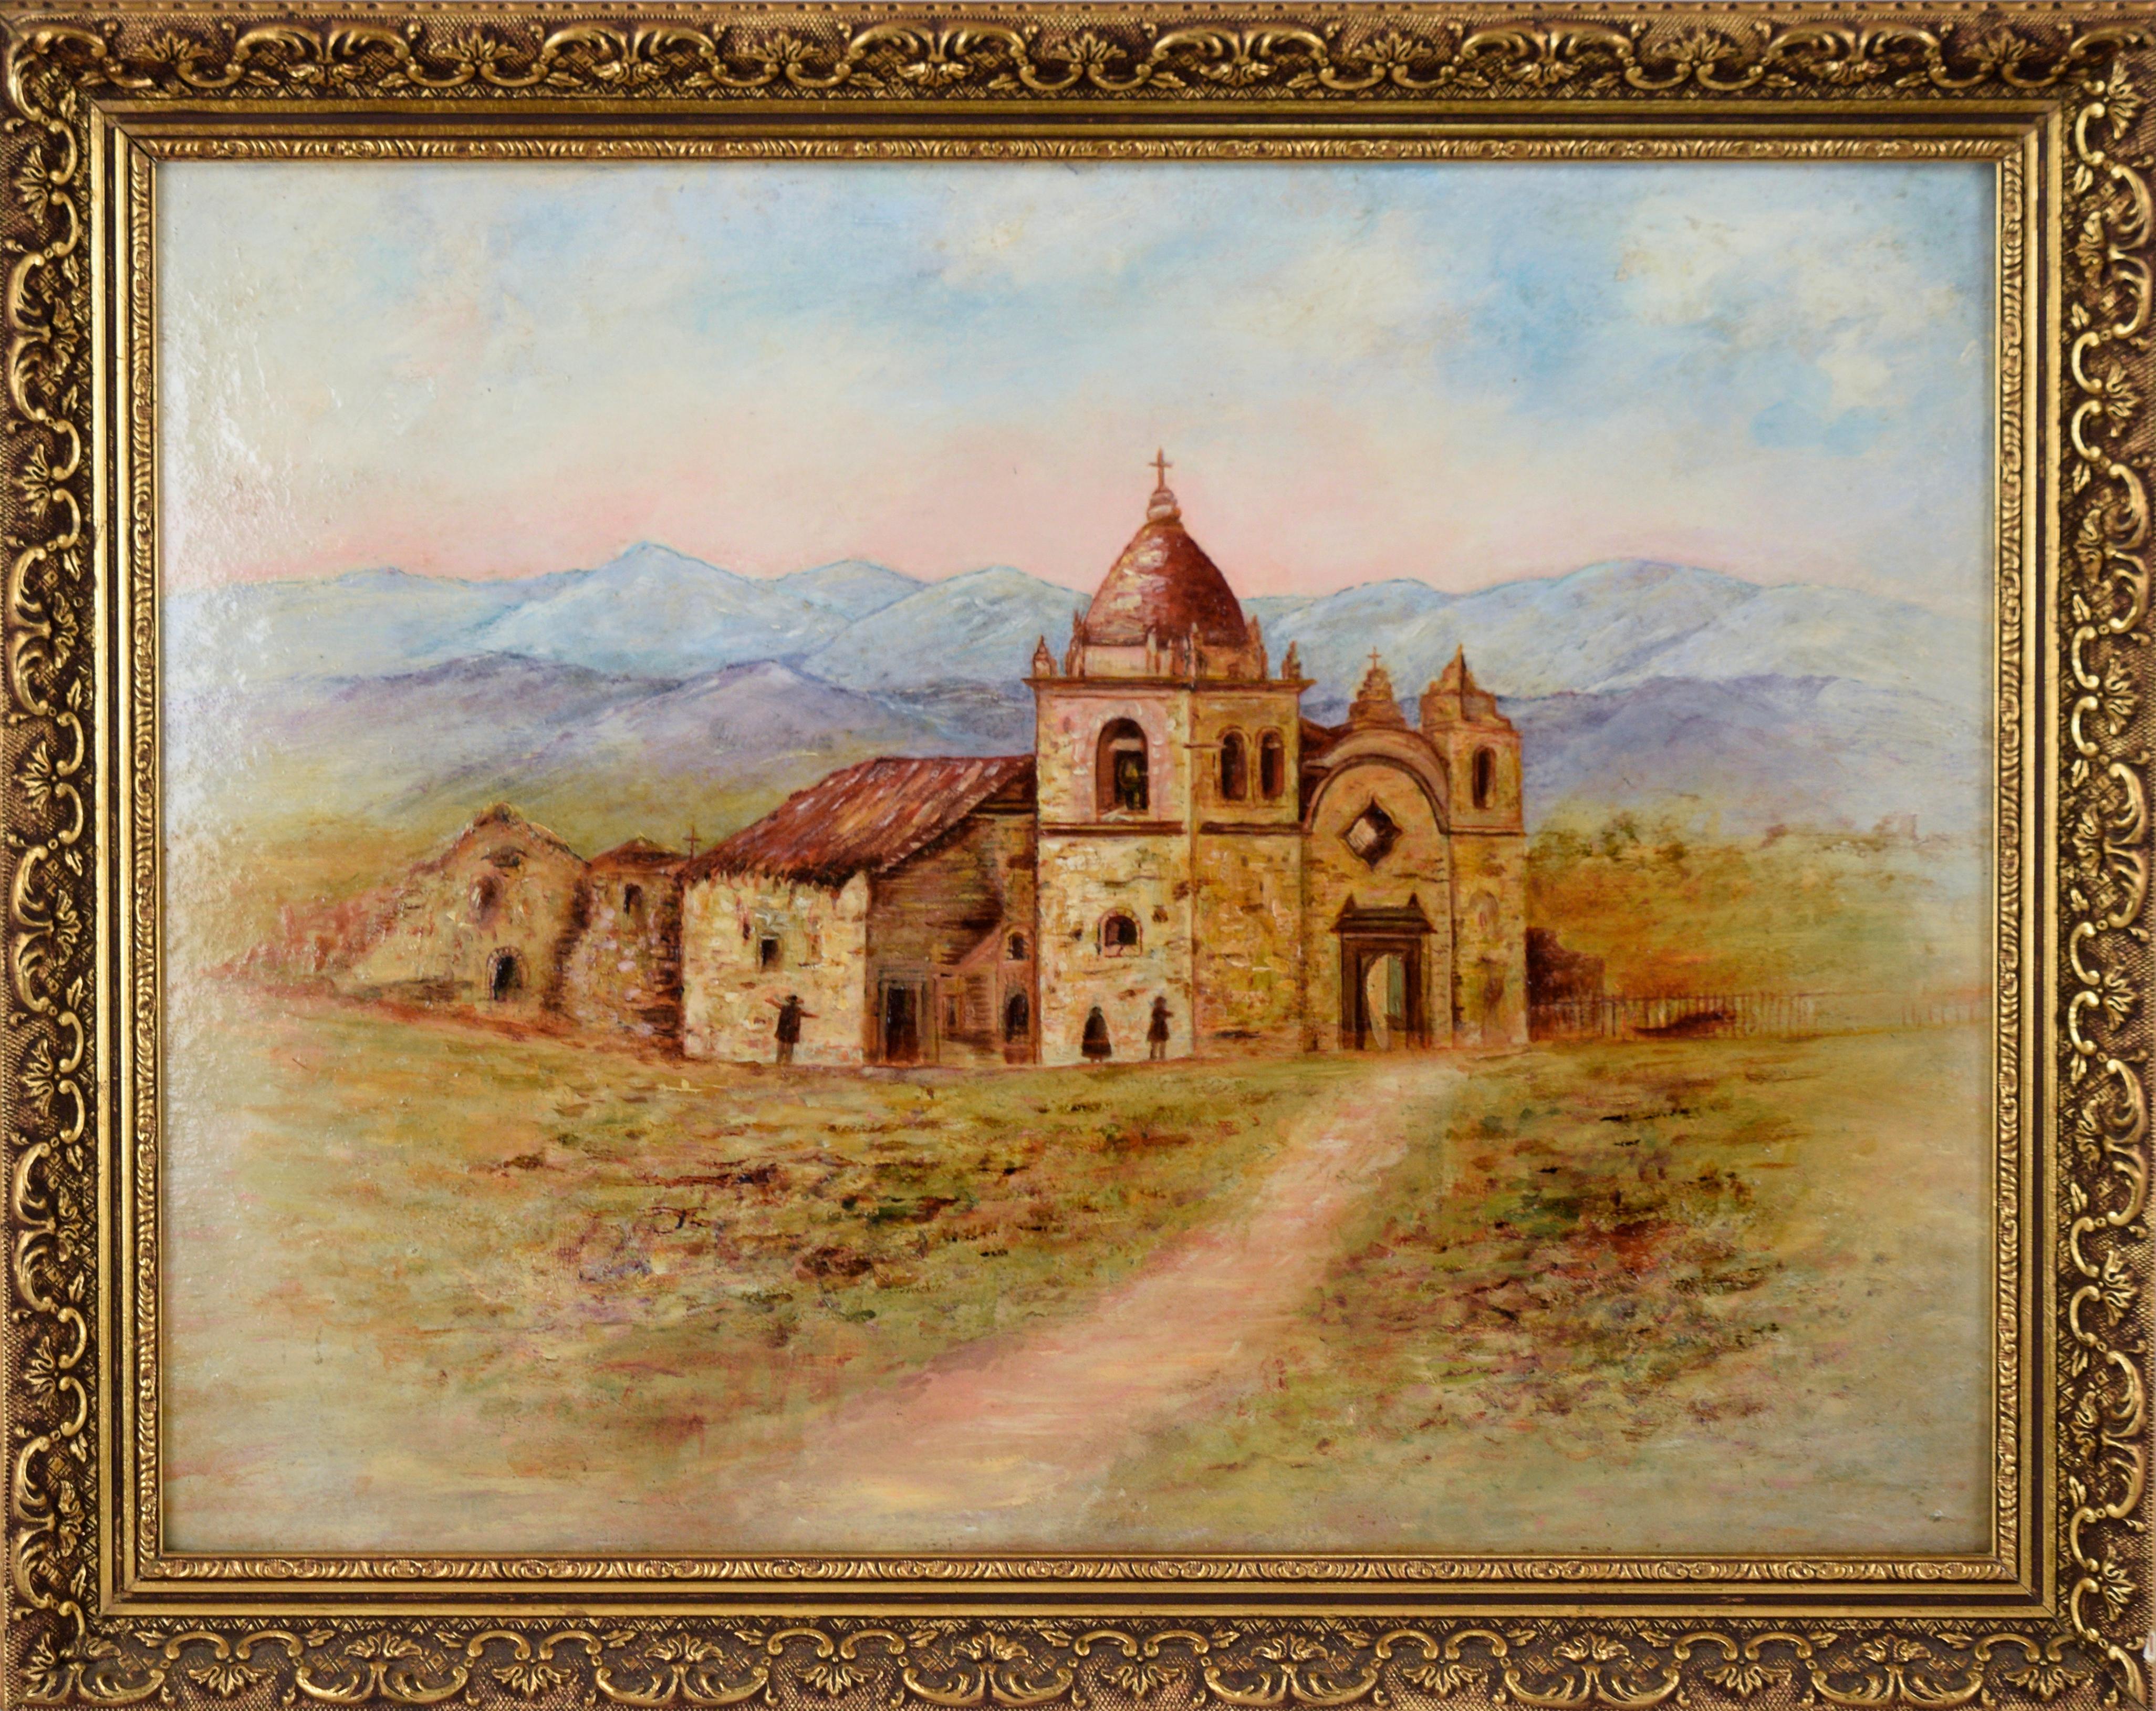 Carmel Mission, 1870 - Landscape Oil Painting

One of California's Mission settlements lies on the Central Coast in Carmel, depicted in this landscape oil painting. The Spanish architecture is the first known to California's establishment, and in